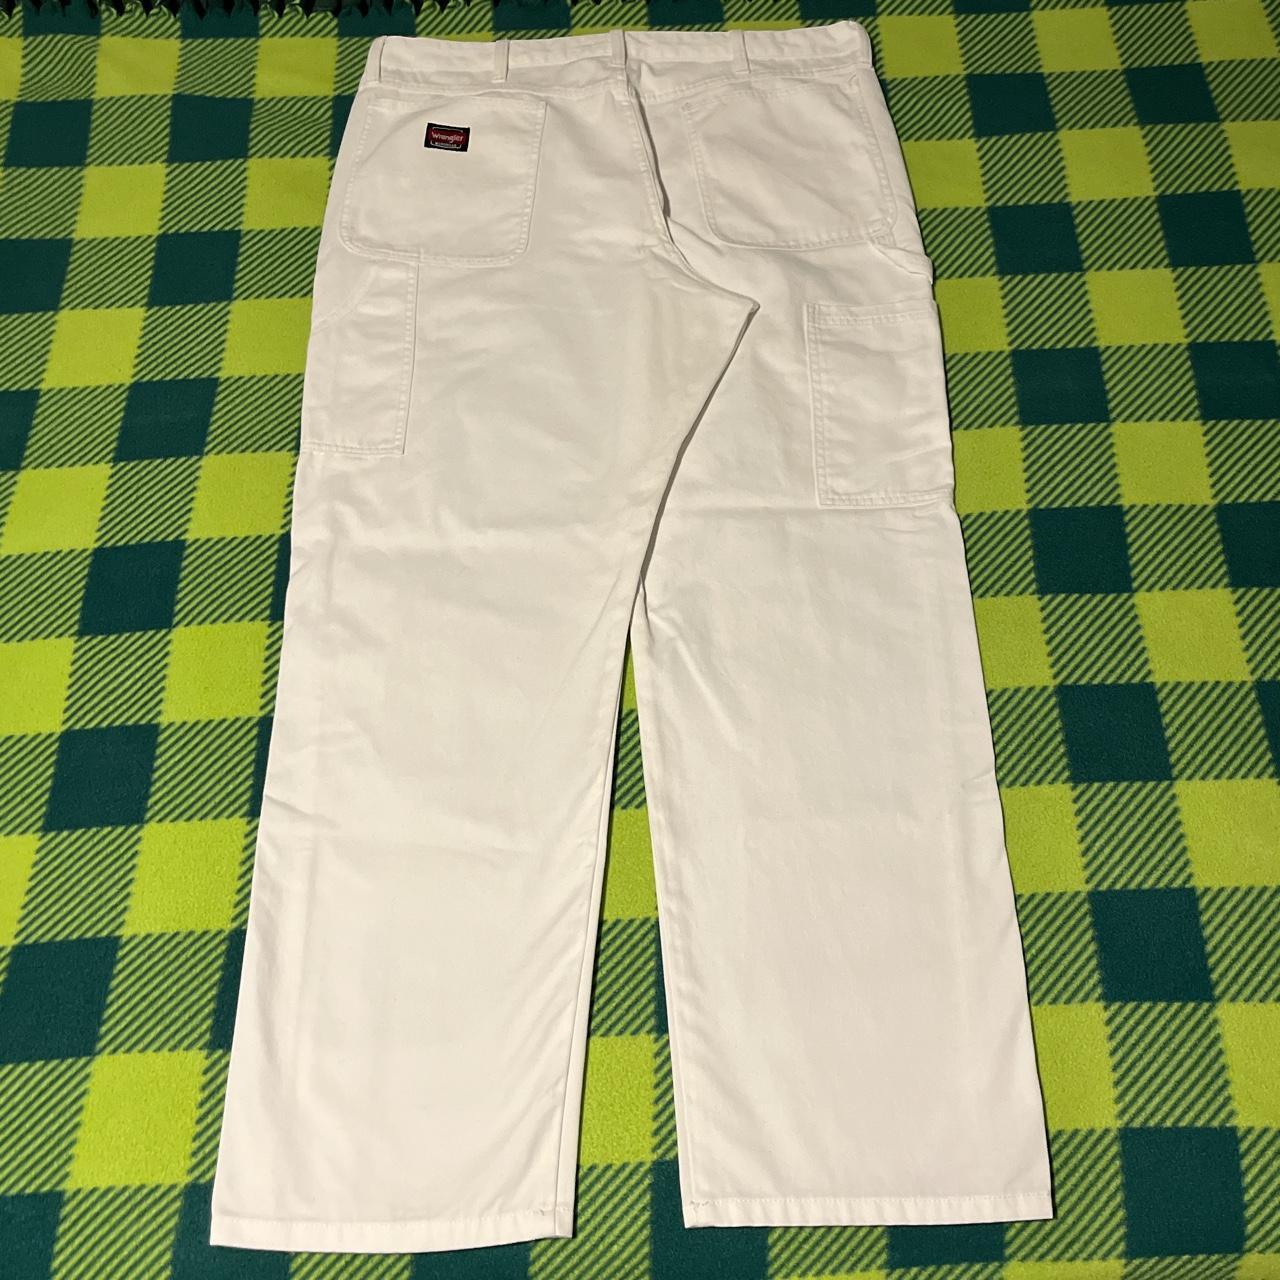 Wrangler Workwear Painters Pant in Bright White